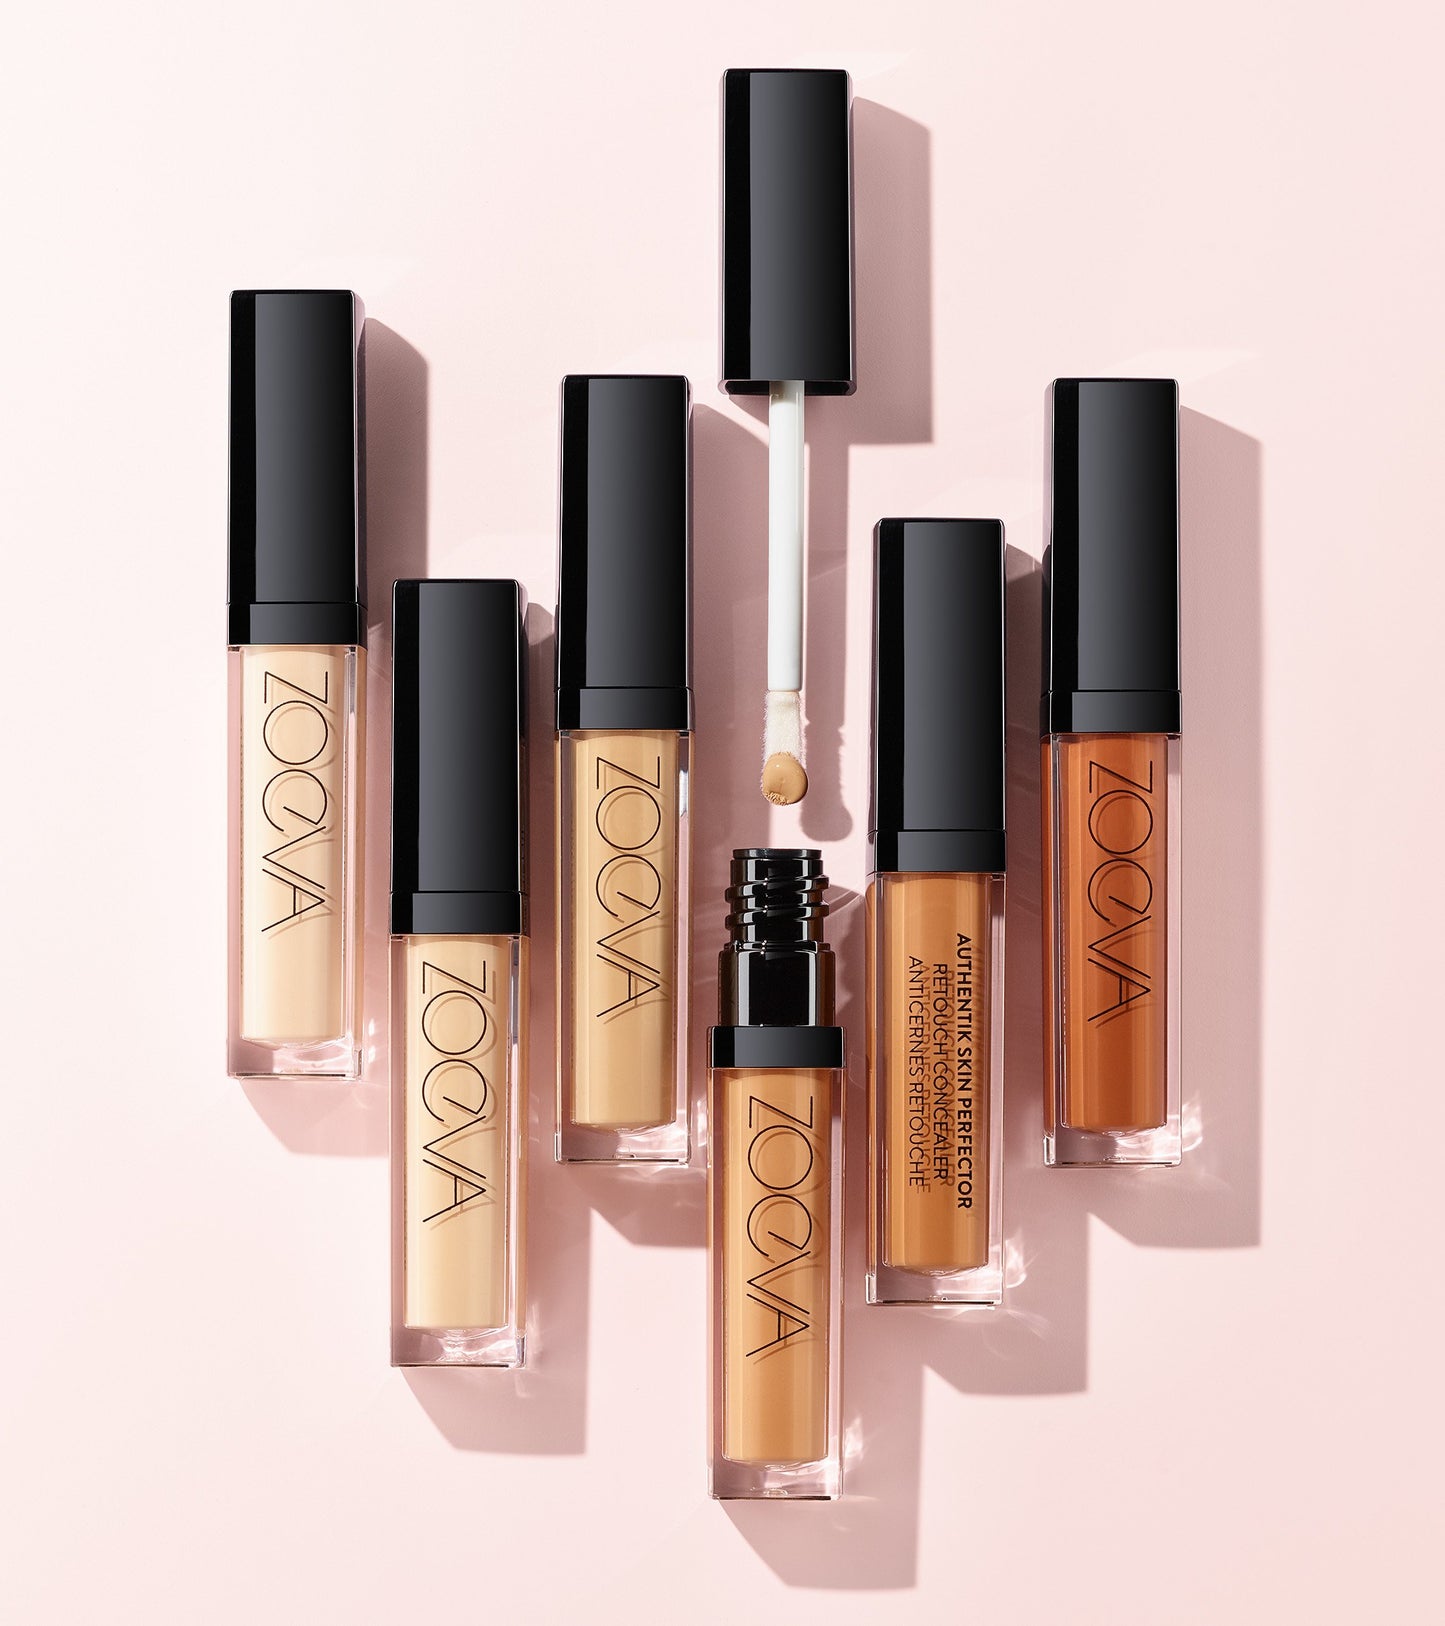 AUTHENTIK SKIN PERFECTOR CONCEALER (180 OFFICIAL) Expanded Image 4